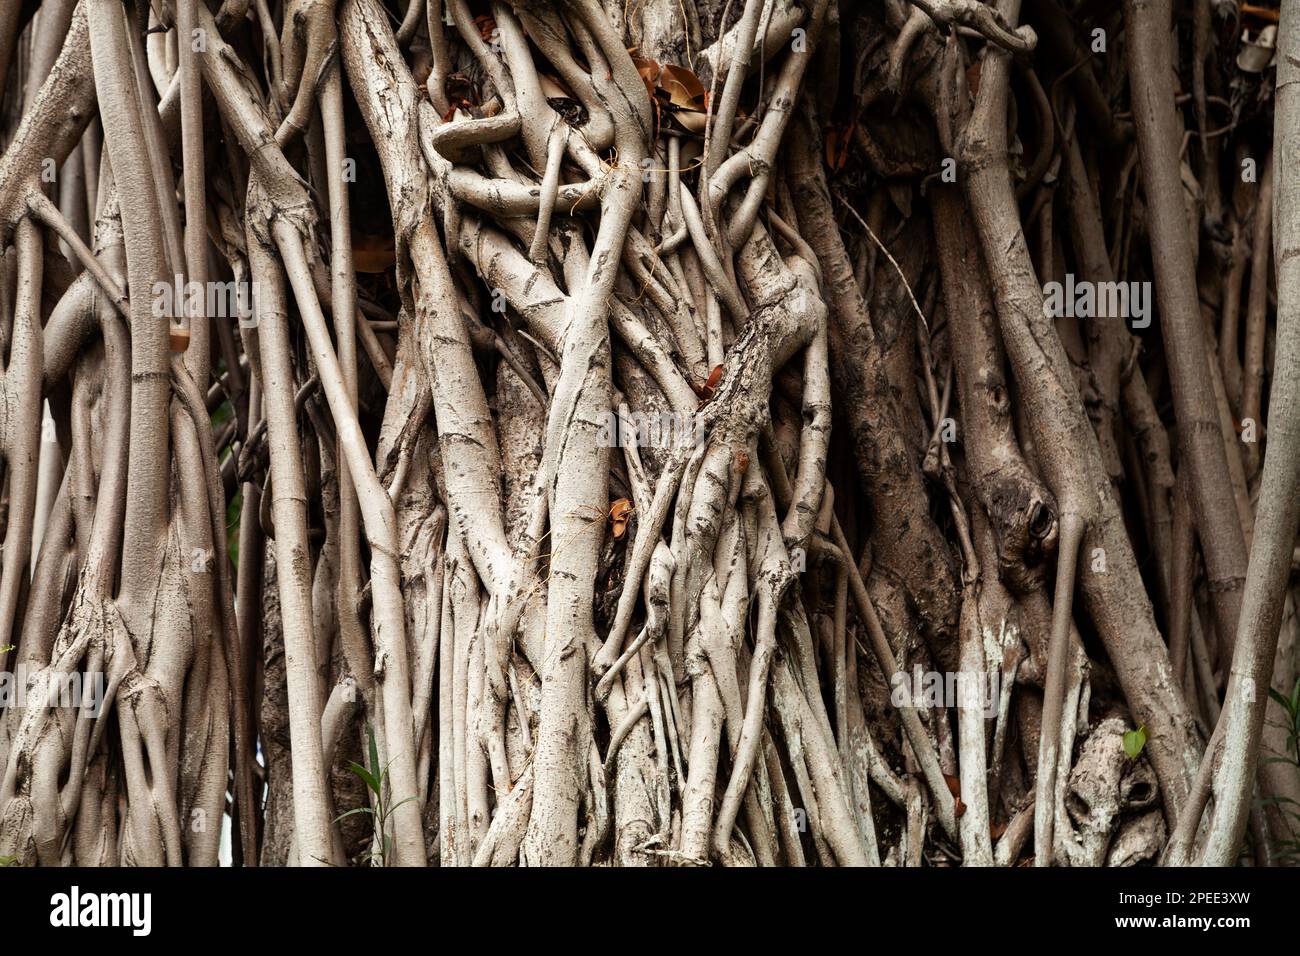 Giant old banyan tree with tangled trunks. Ominous enchanted forest concept Stock Photo